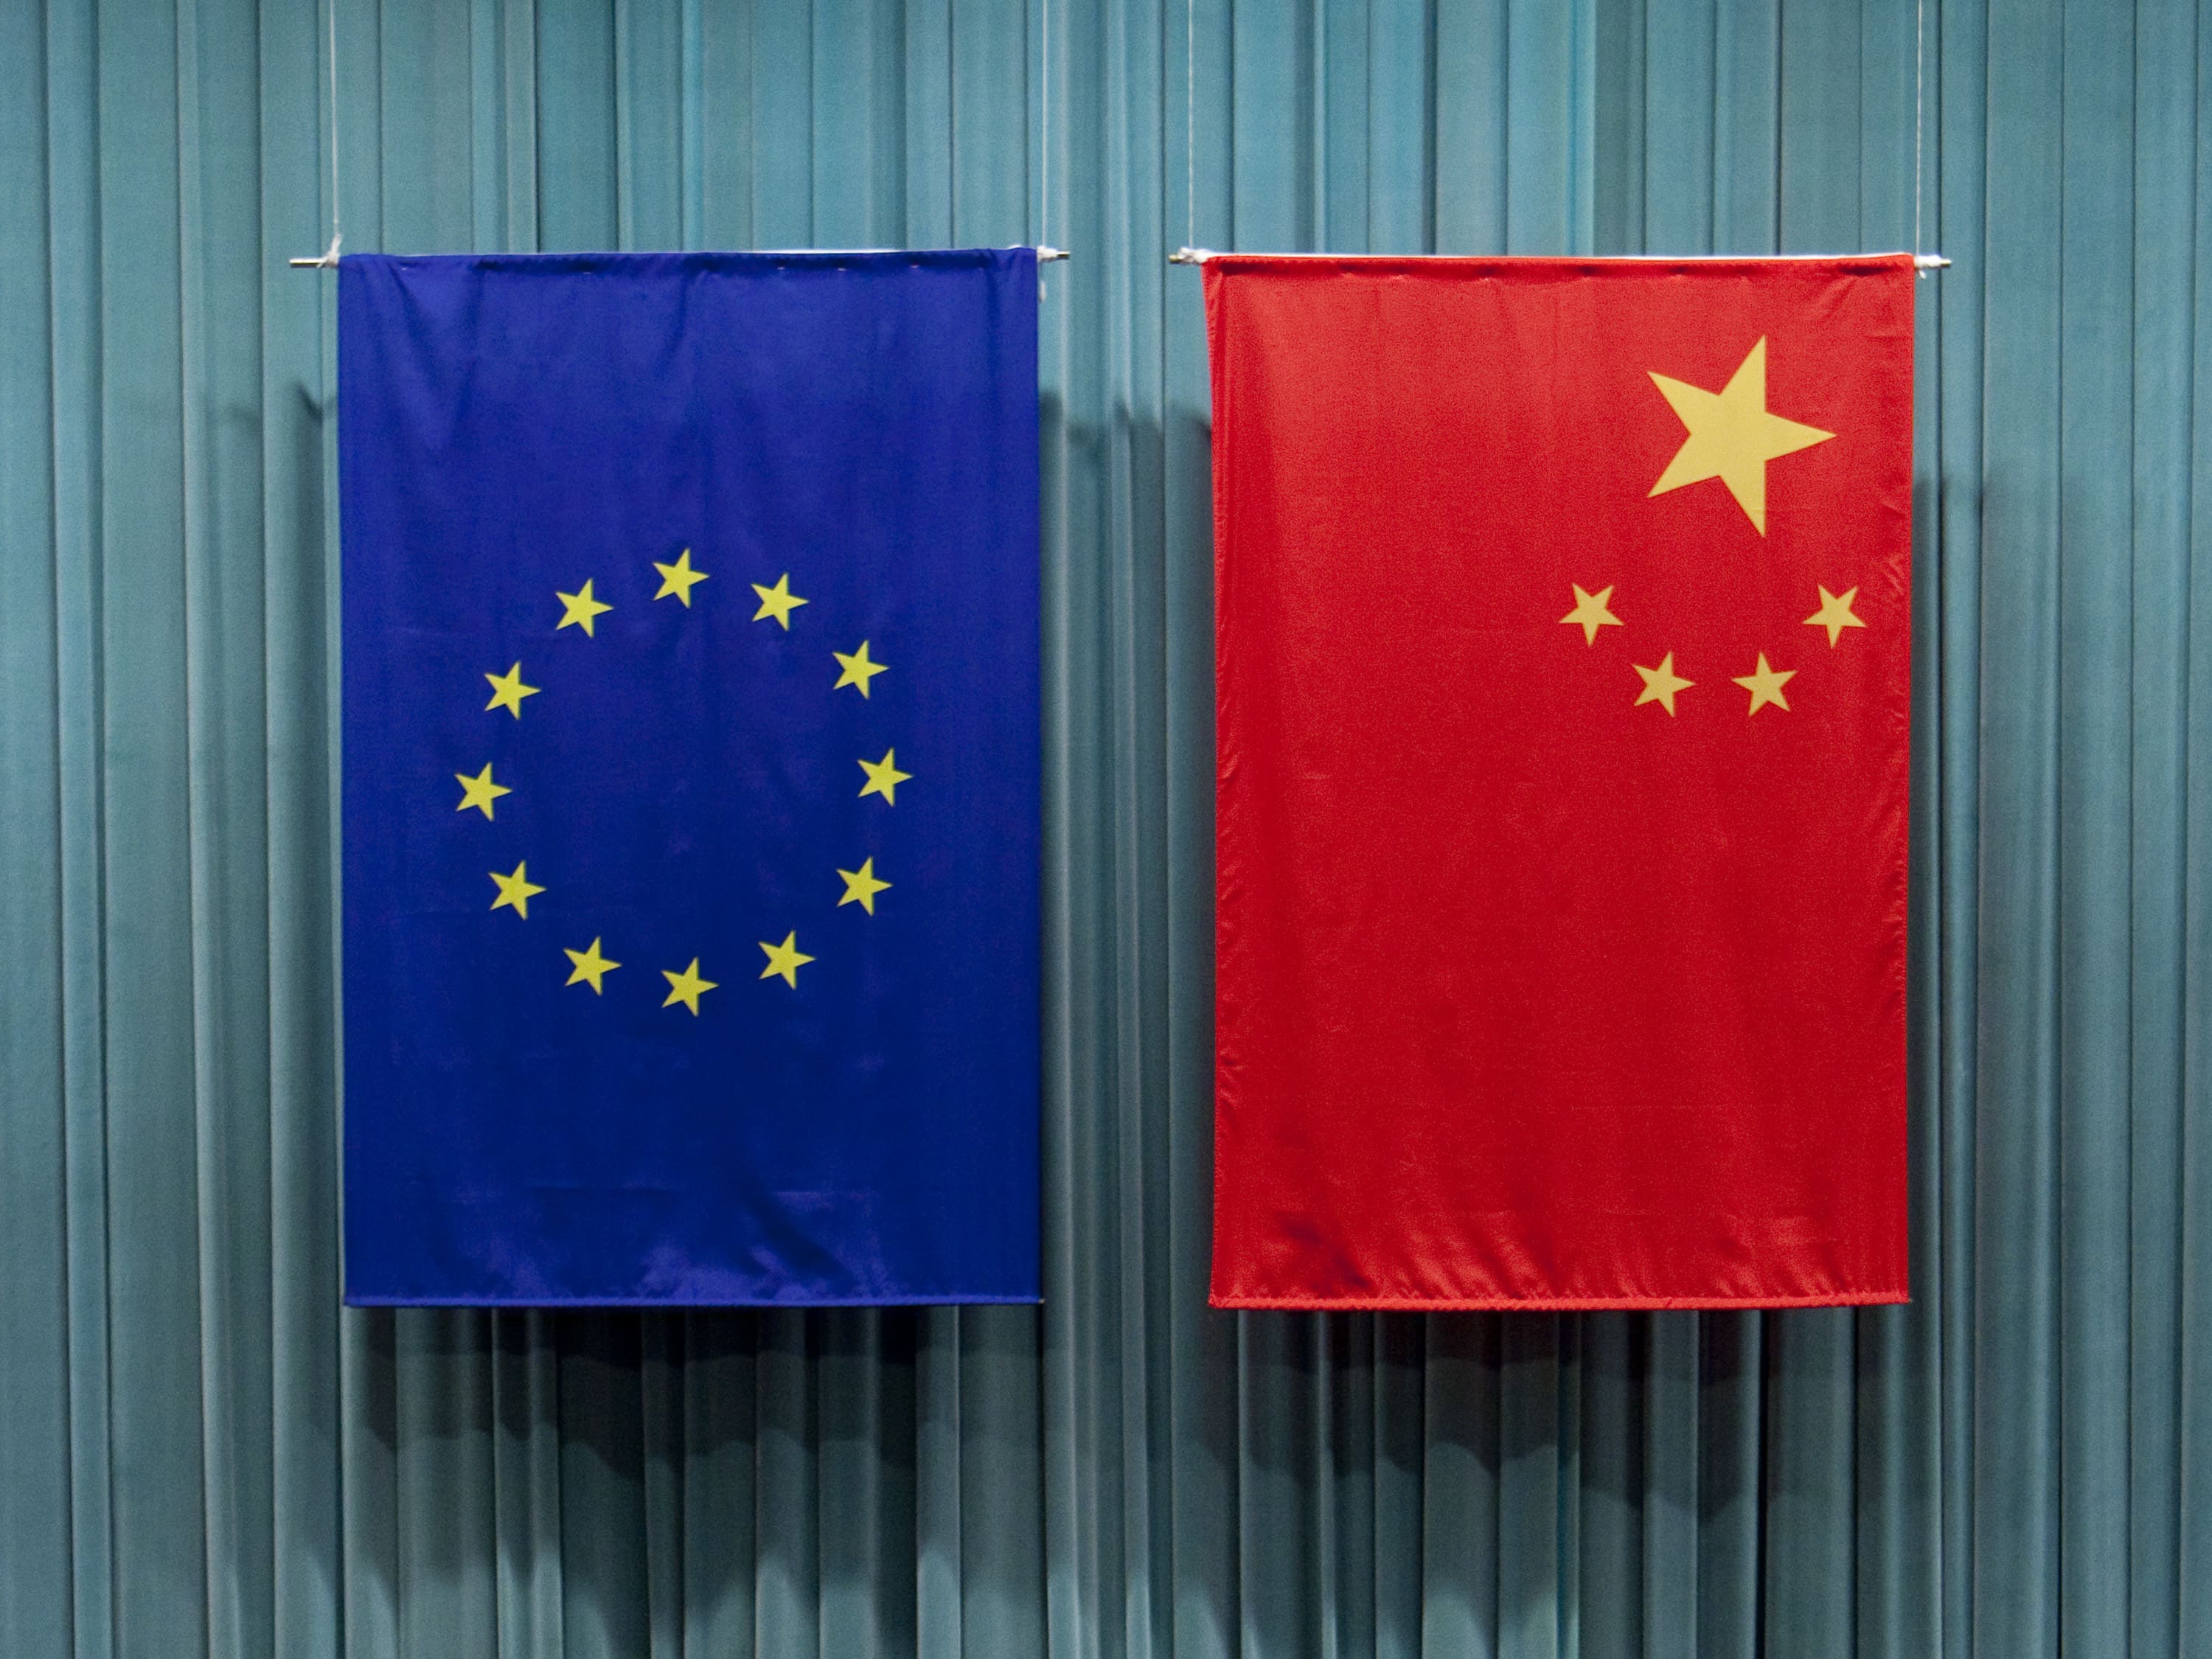 Retaliatory sanctions between EU and China could jeopardize new investment agreement